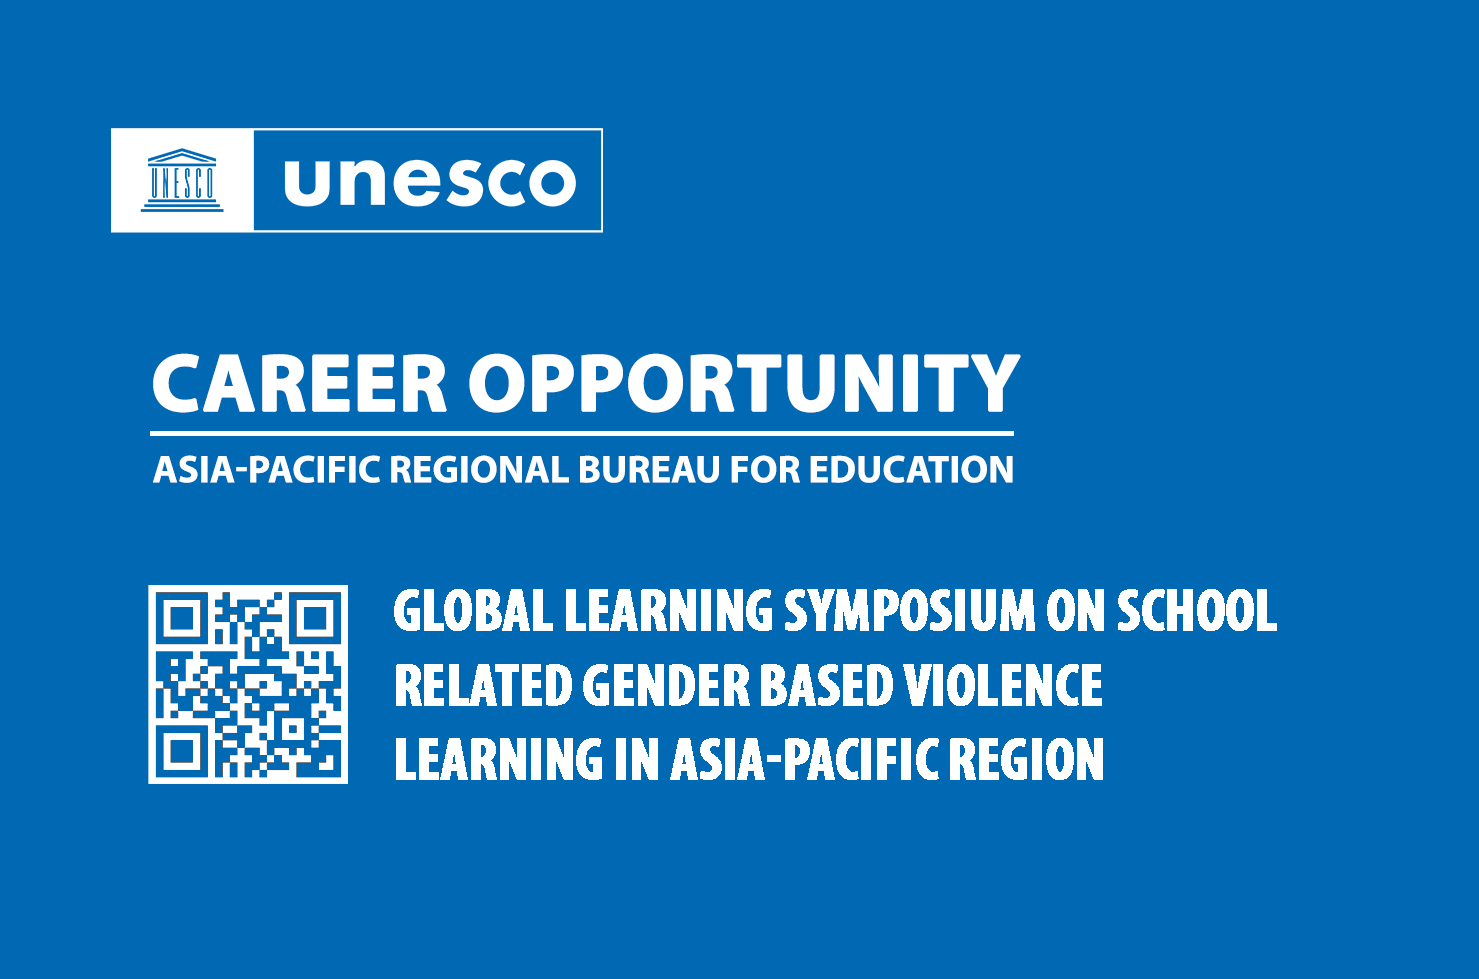 Call for Consultancy: Global Learning Symposium on School Related Gender Based Violence - Learning in Asia-Pacific Region